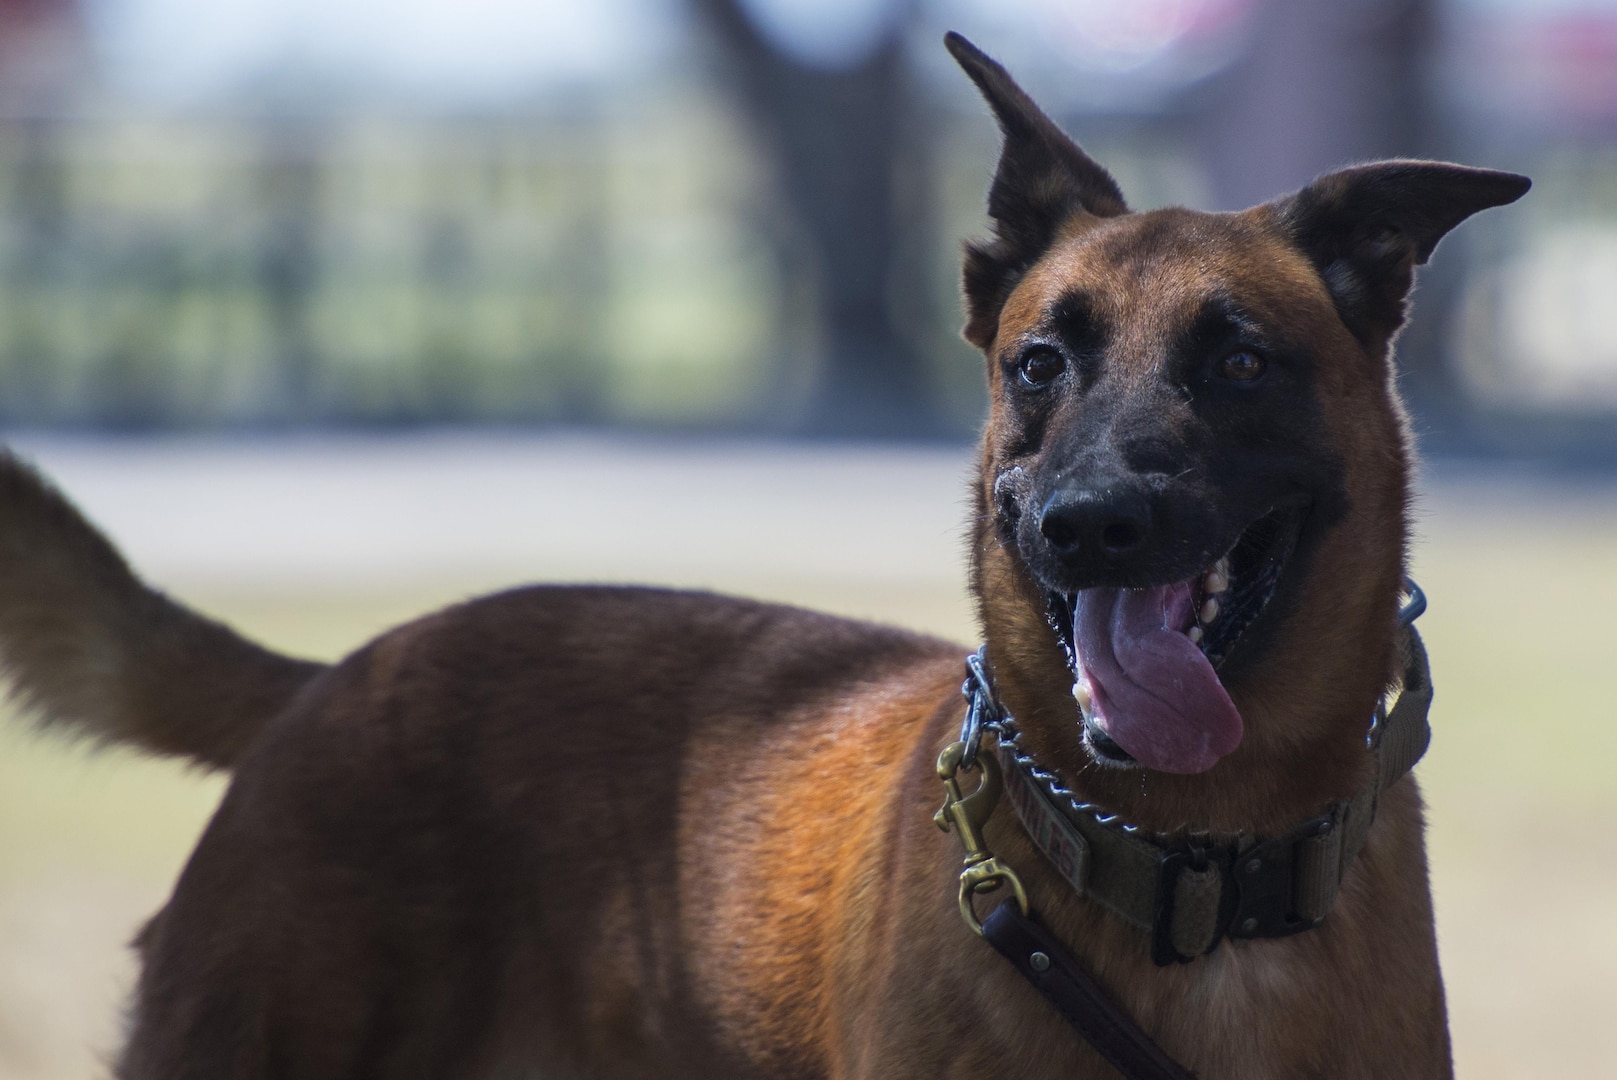 CCharles, 902nd Security Forces Squadron military workding dog, prepares for a search and detection demonstration during the Joint Base San Antonio Battle of the Badges Sept. 12, 2015, at JBSA-Randolph. Battle of the Badges takes place each year to build camaraderie, espirit de corps and cohesion among JBSA first responders through various competitive challenges taken from their daily missions.